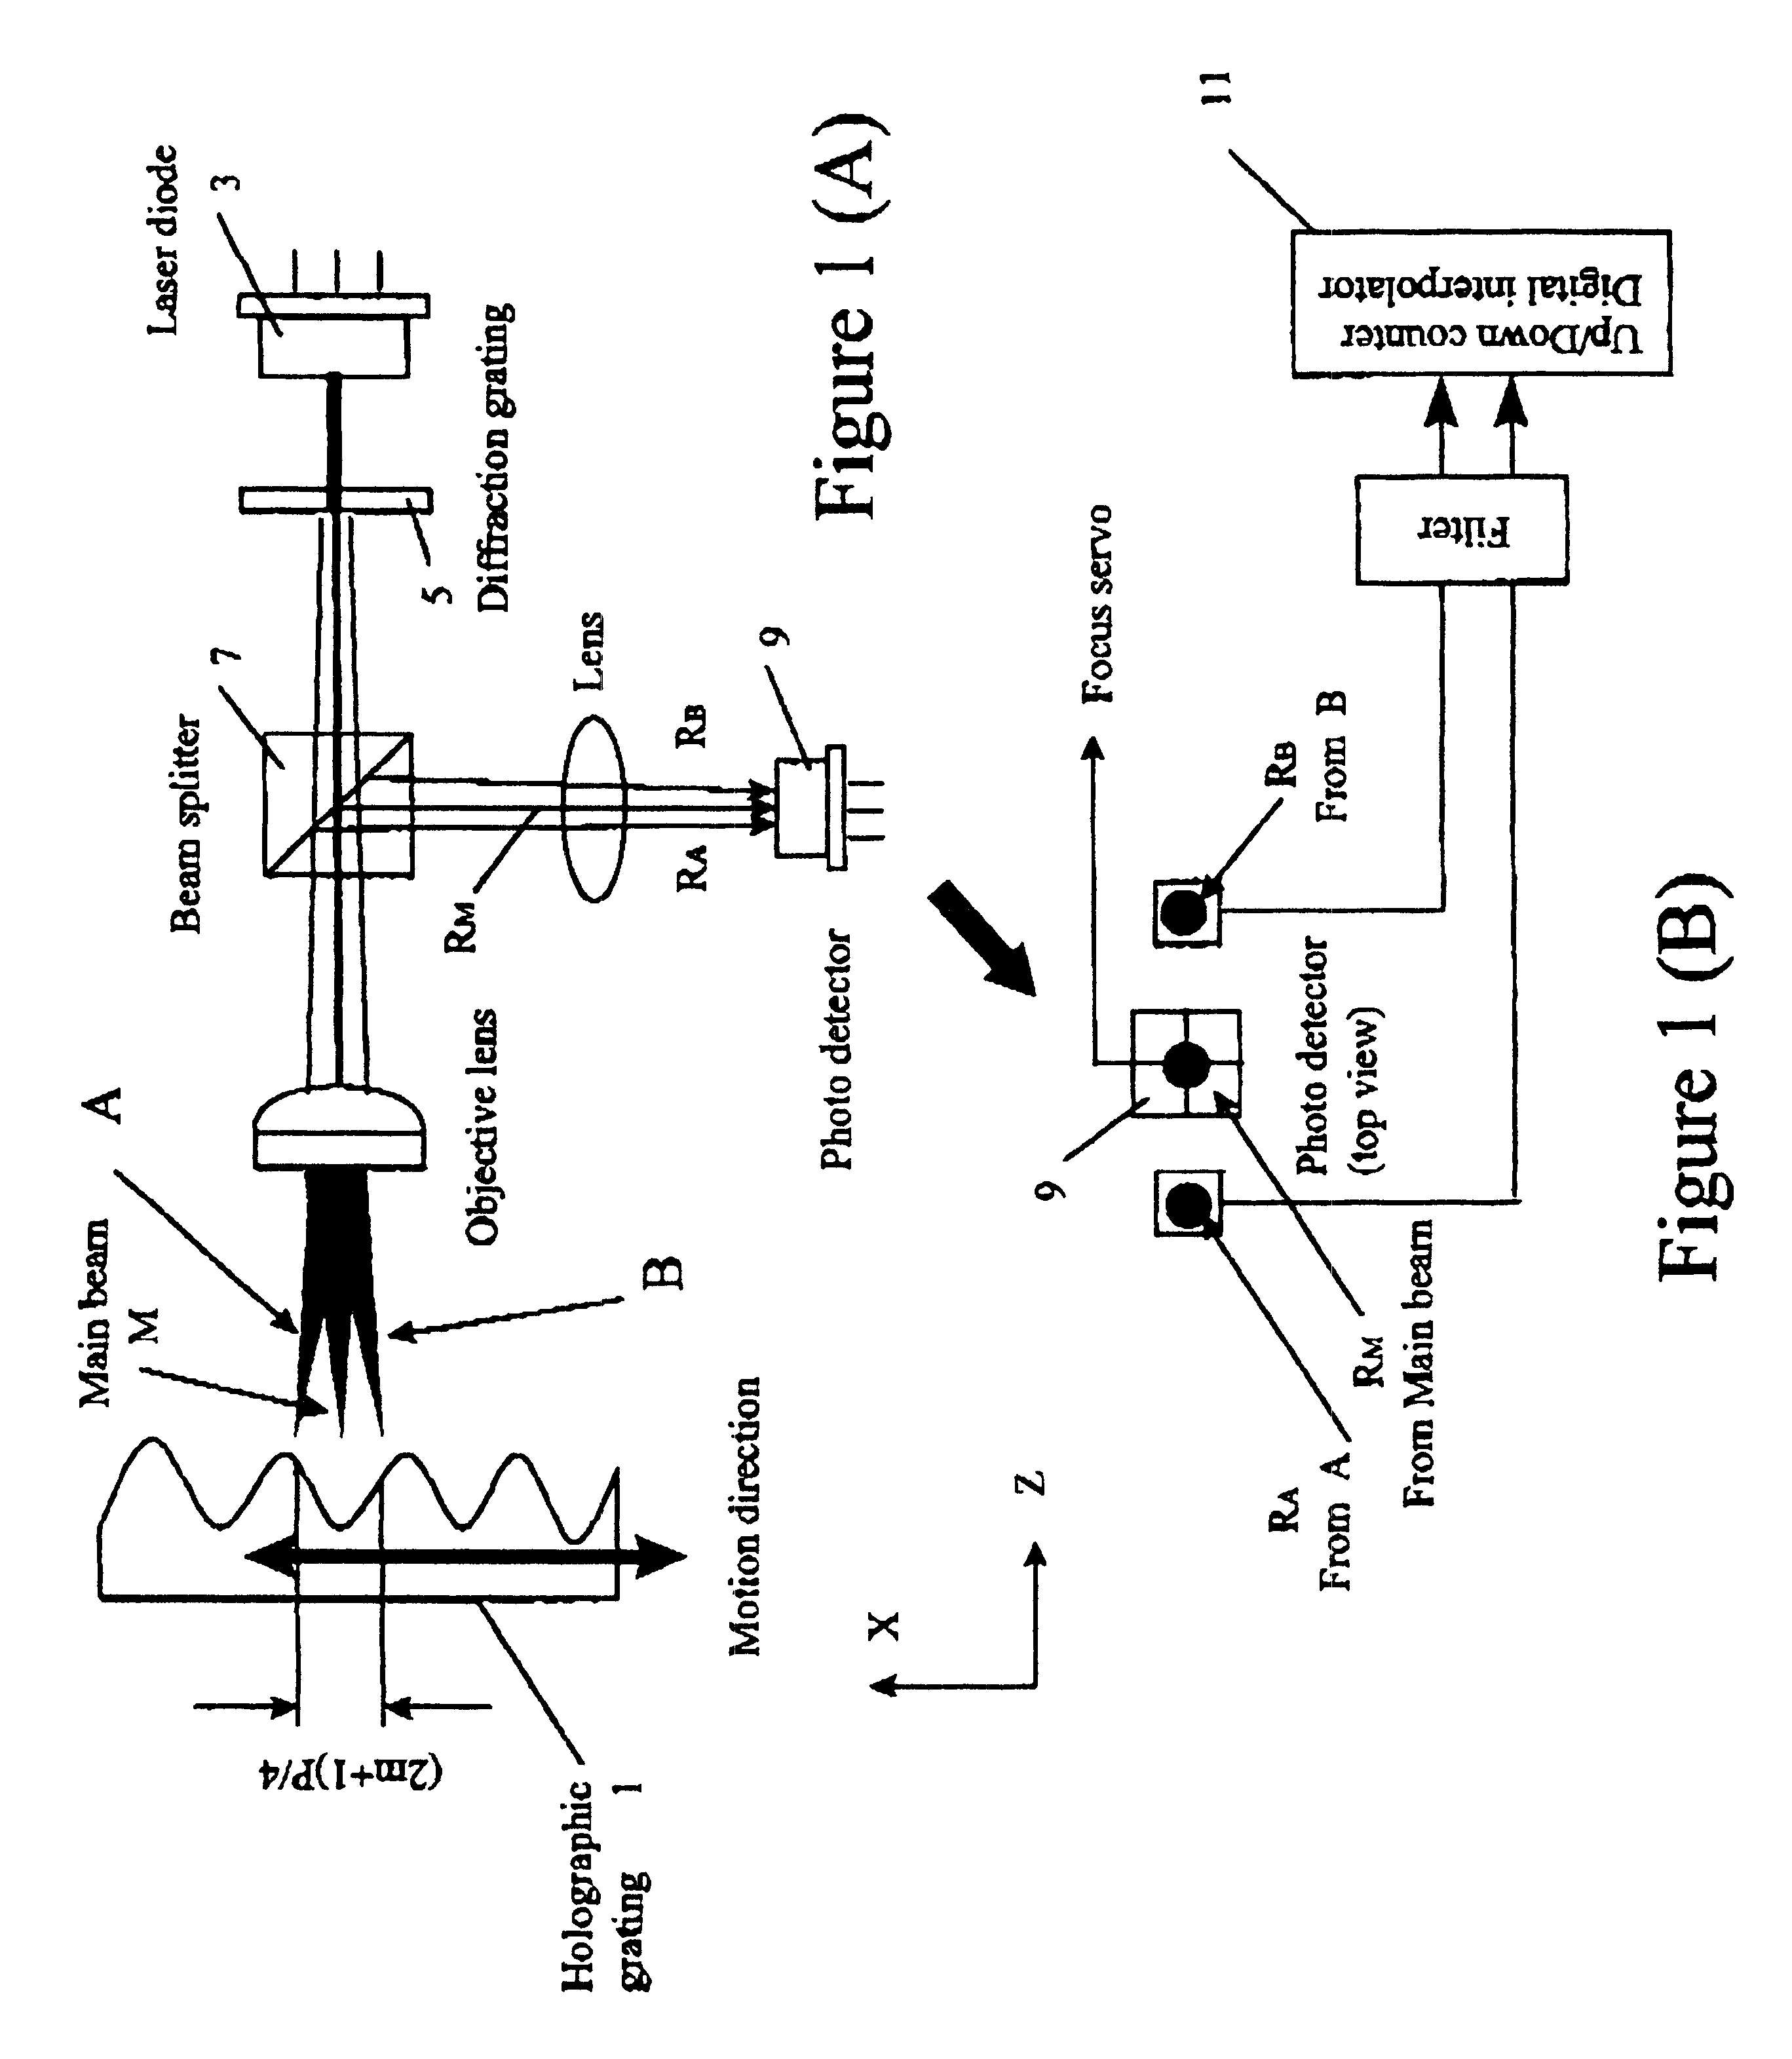 Method of and apparatus for real-time continual nanometer scale position measurement by beam probing as by laser beams and the like of atomic and other undulating surfaces such as gratings or the like relatively moving with respect to the probing beams